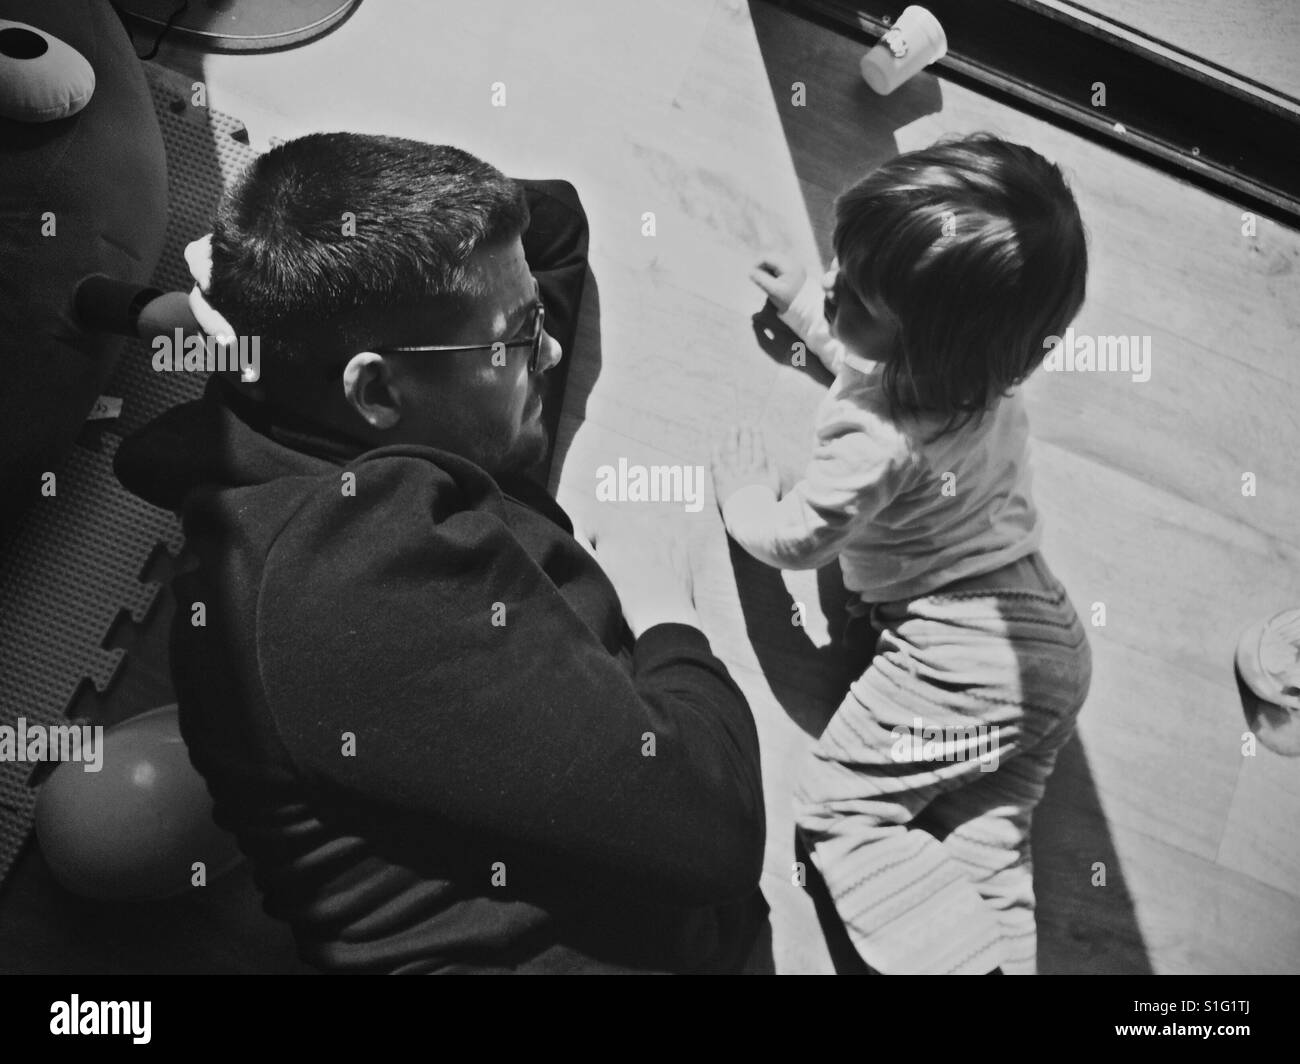 Daddy daughter toddler playtime monochrome black and white Stock Photo